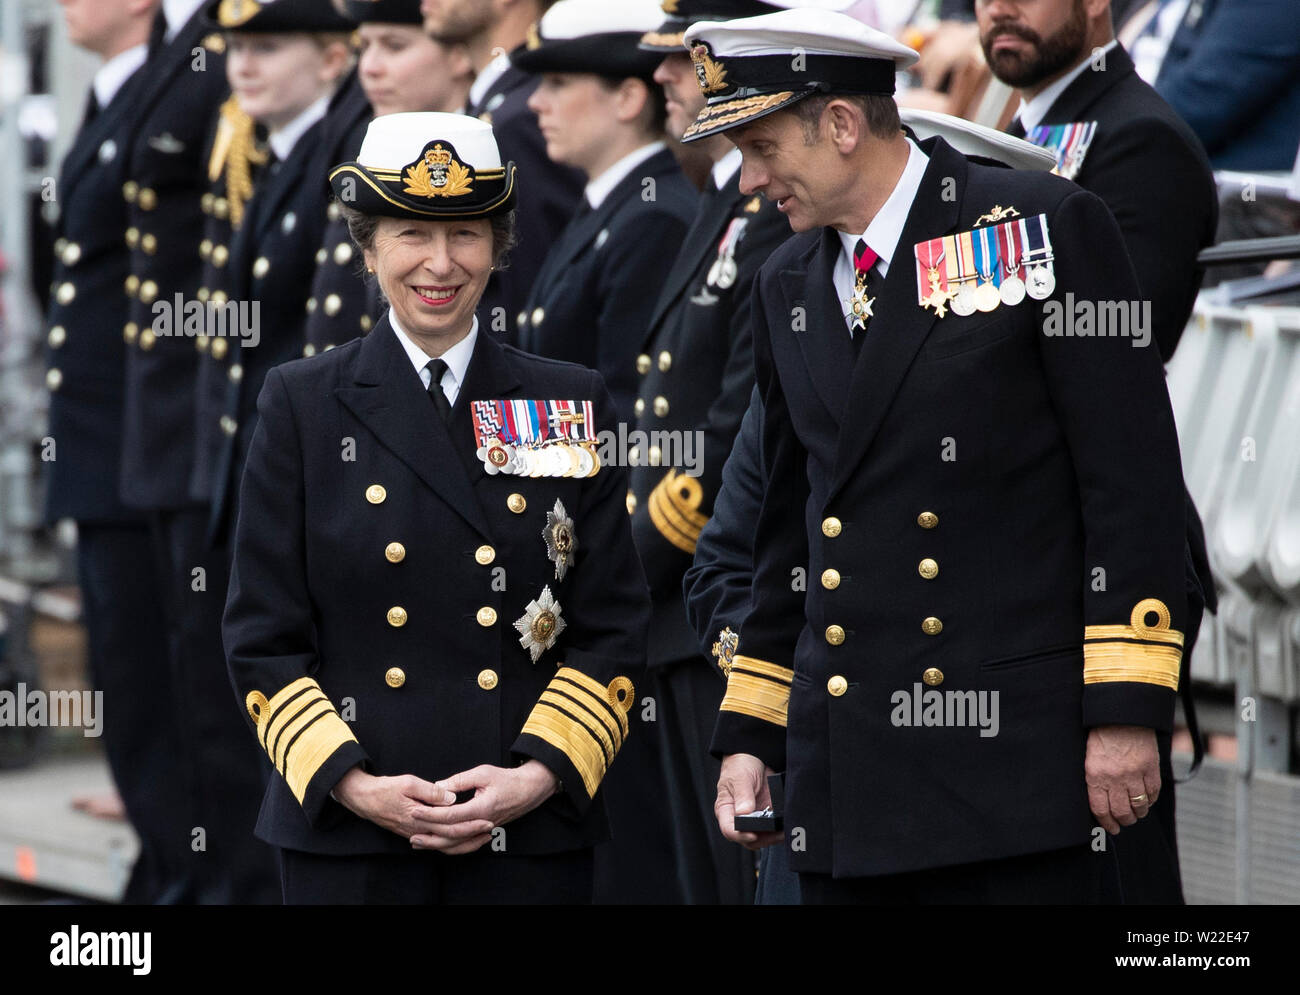 The Princess Royal and Rear Admiral John Weale (right) join serving Royal Navy submariners, veterans, families and support workers gather at HM Naval Base Clyde, the home of the UK Submarine Service at Faslane in Argyll and Bute, to mark 50 years of the Continuous At Sea Deterrent (CASD). Stock Photo